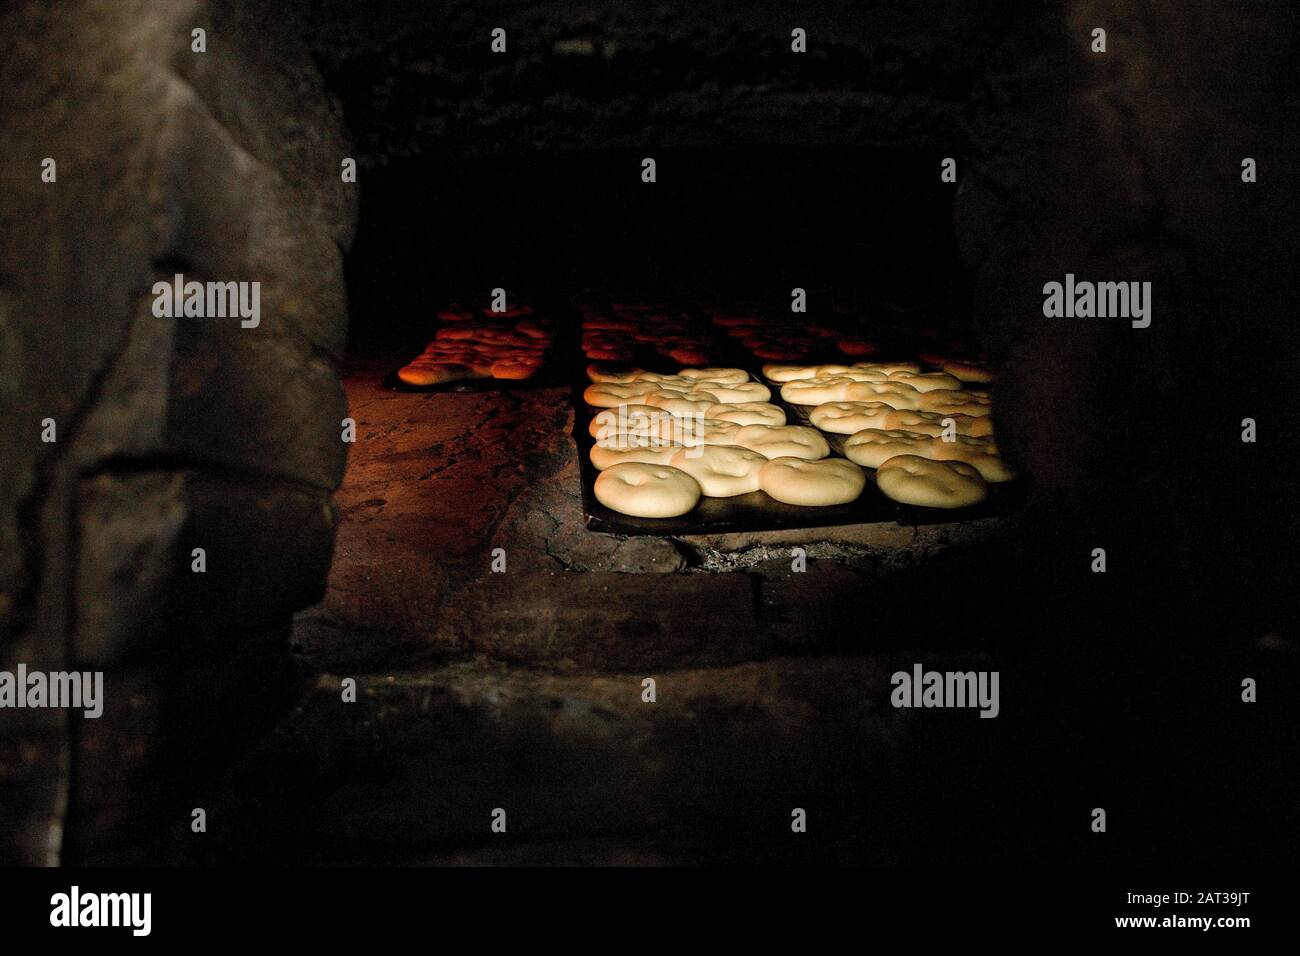 Traditional Bakery in Pilcopata Village, Bread in Baker's Oven, Peru Stock Photo